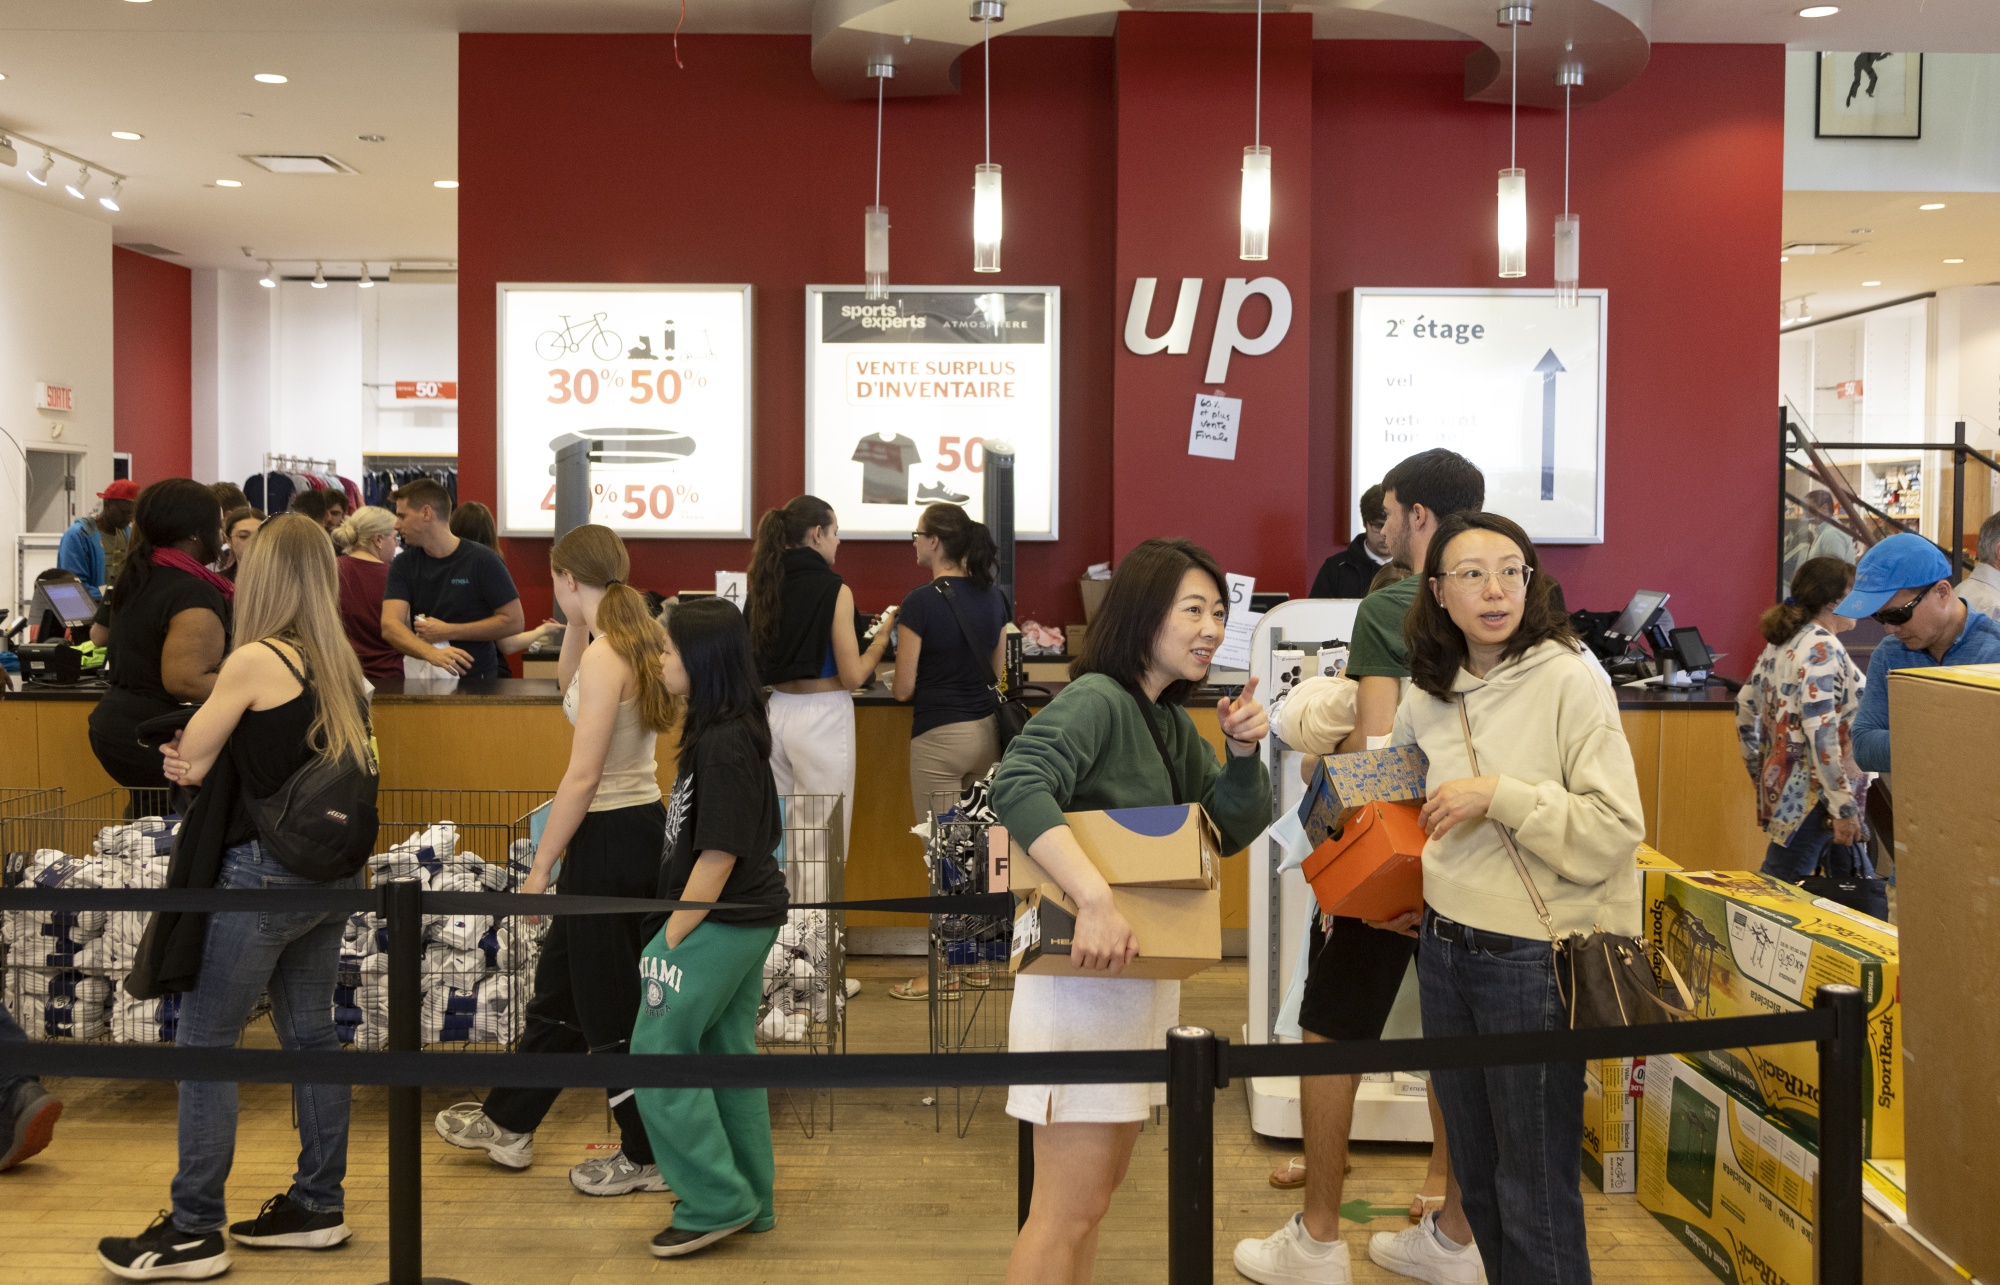 UNIQLO South East Asia Store staff  FAST RETAILING CAREER OPPORTUNITIES